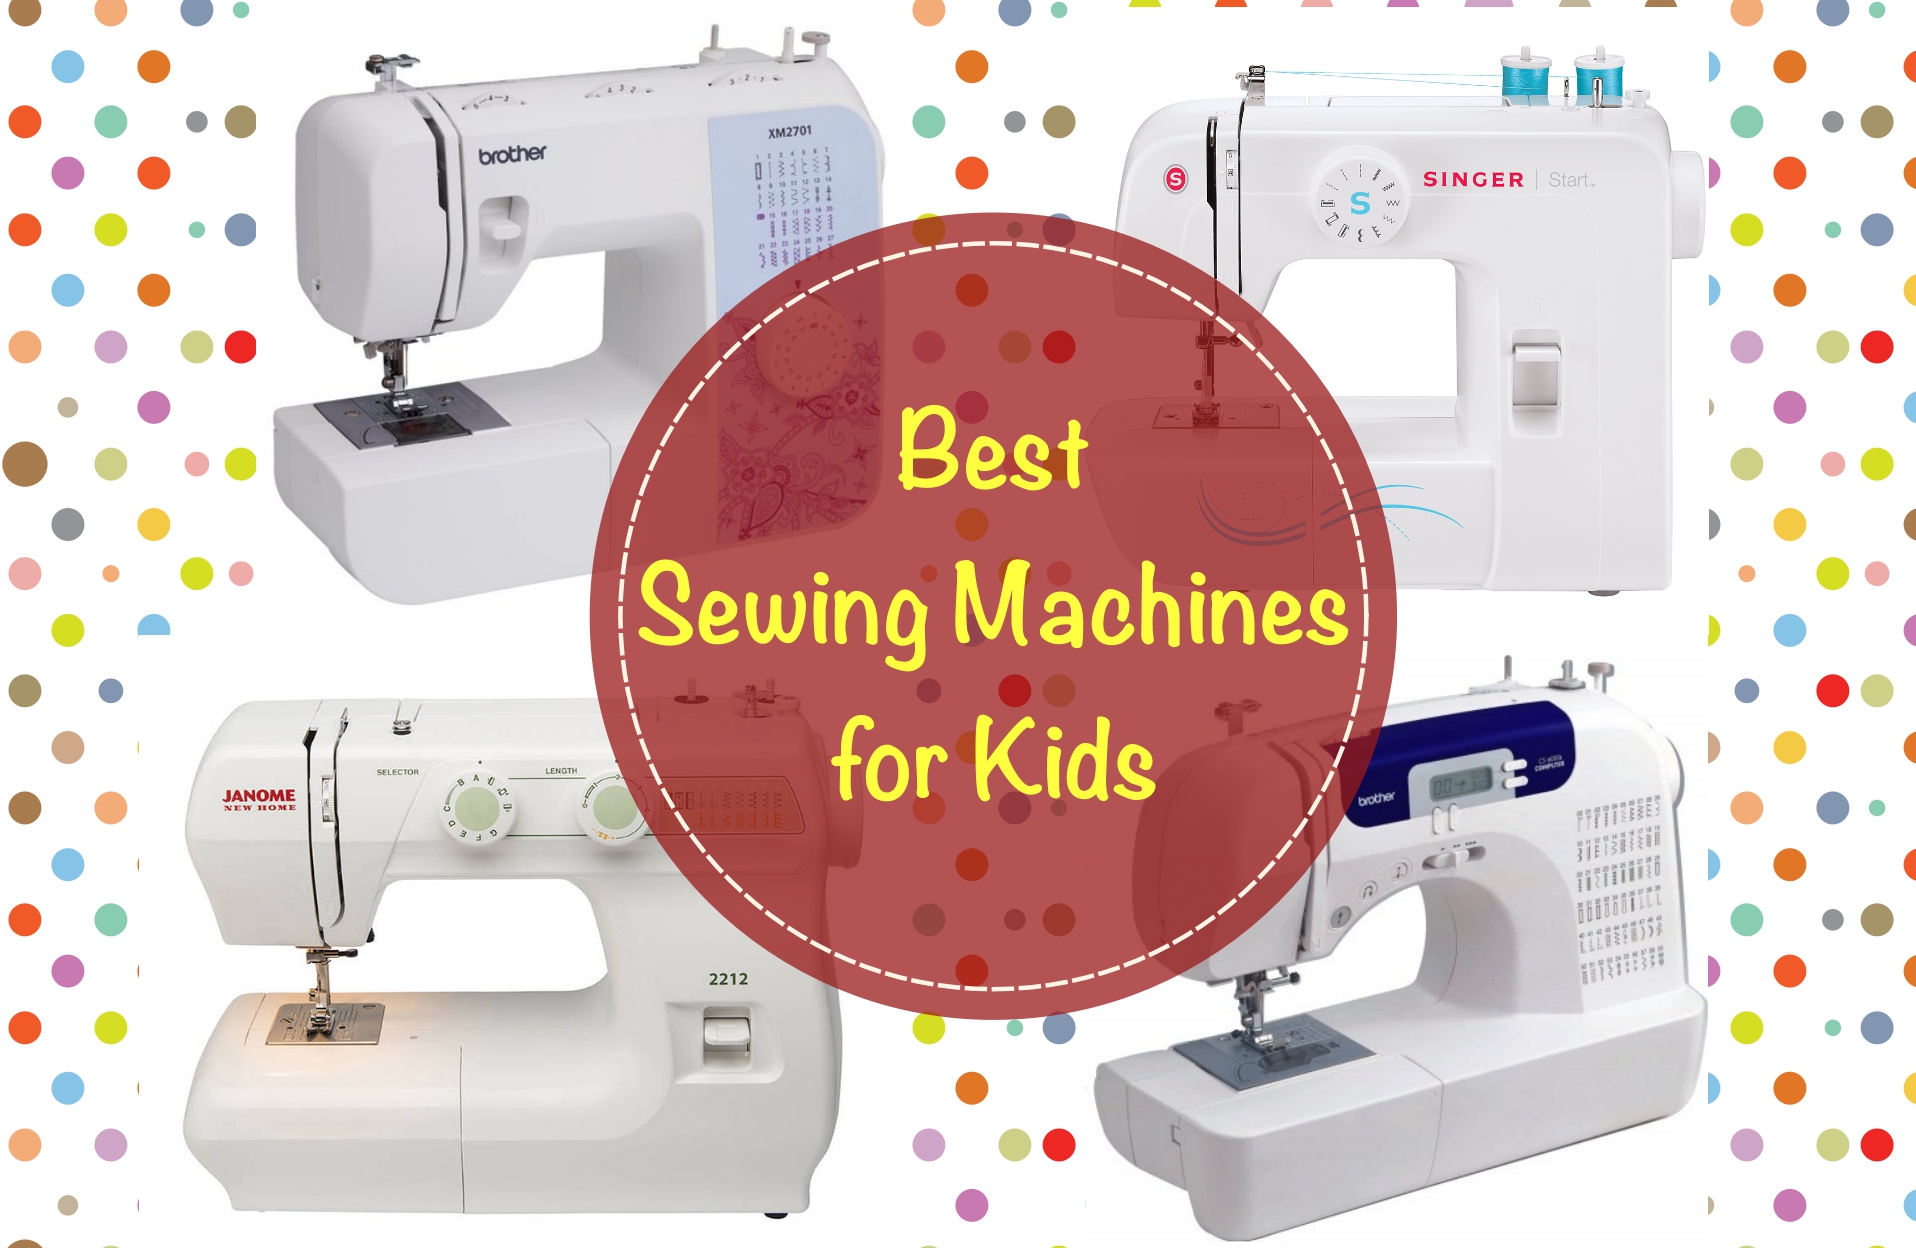 Best Sewing Machines for Kids